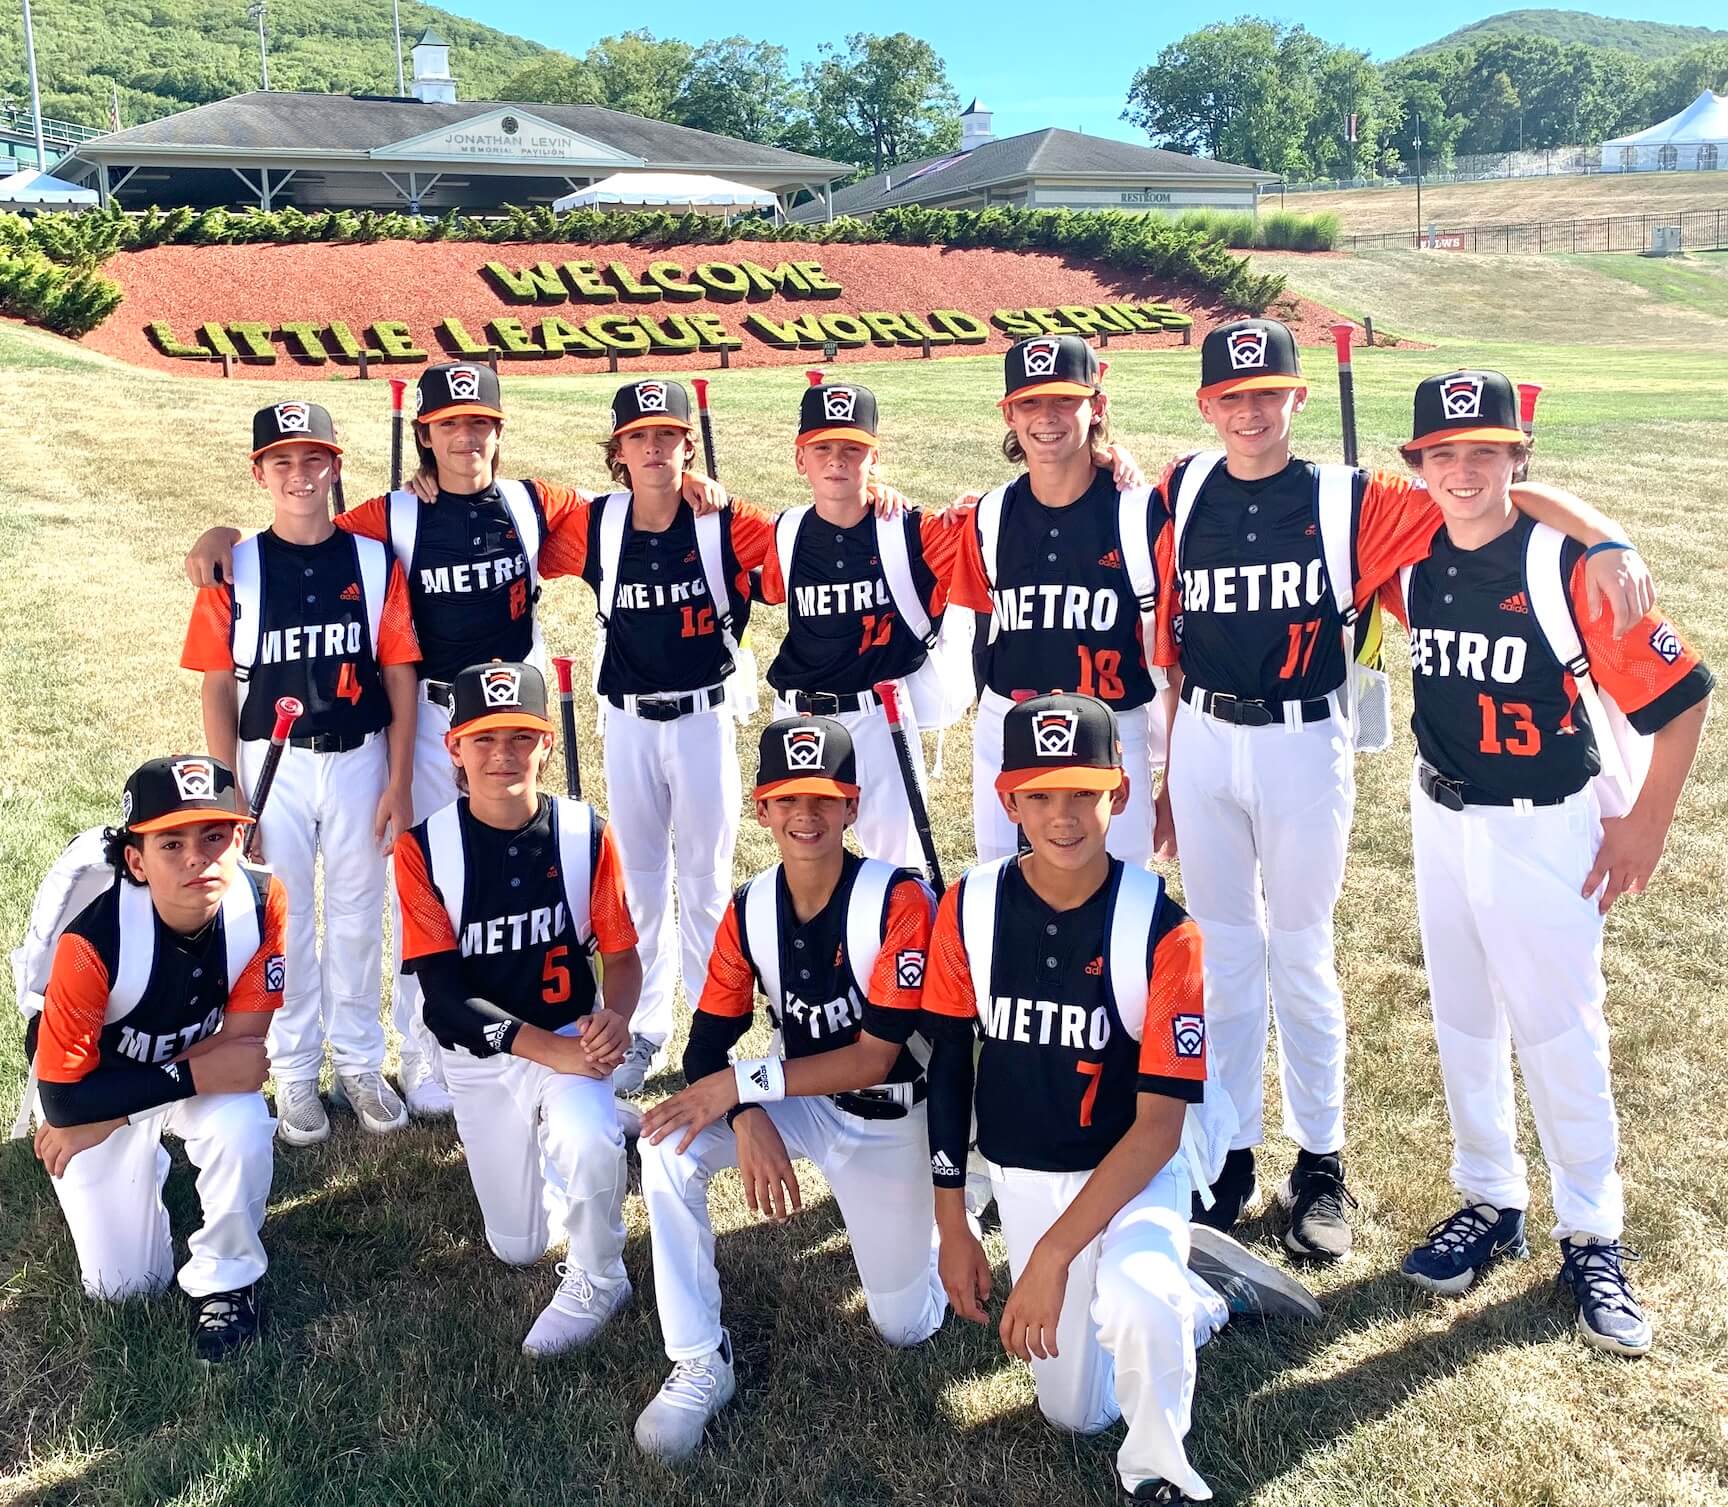 How to watch the Little League 2023 Metro regional championship